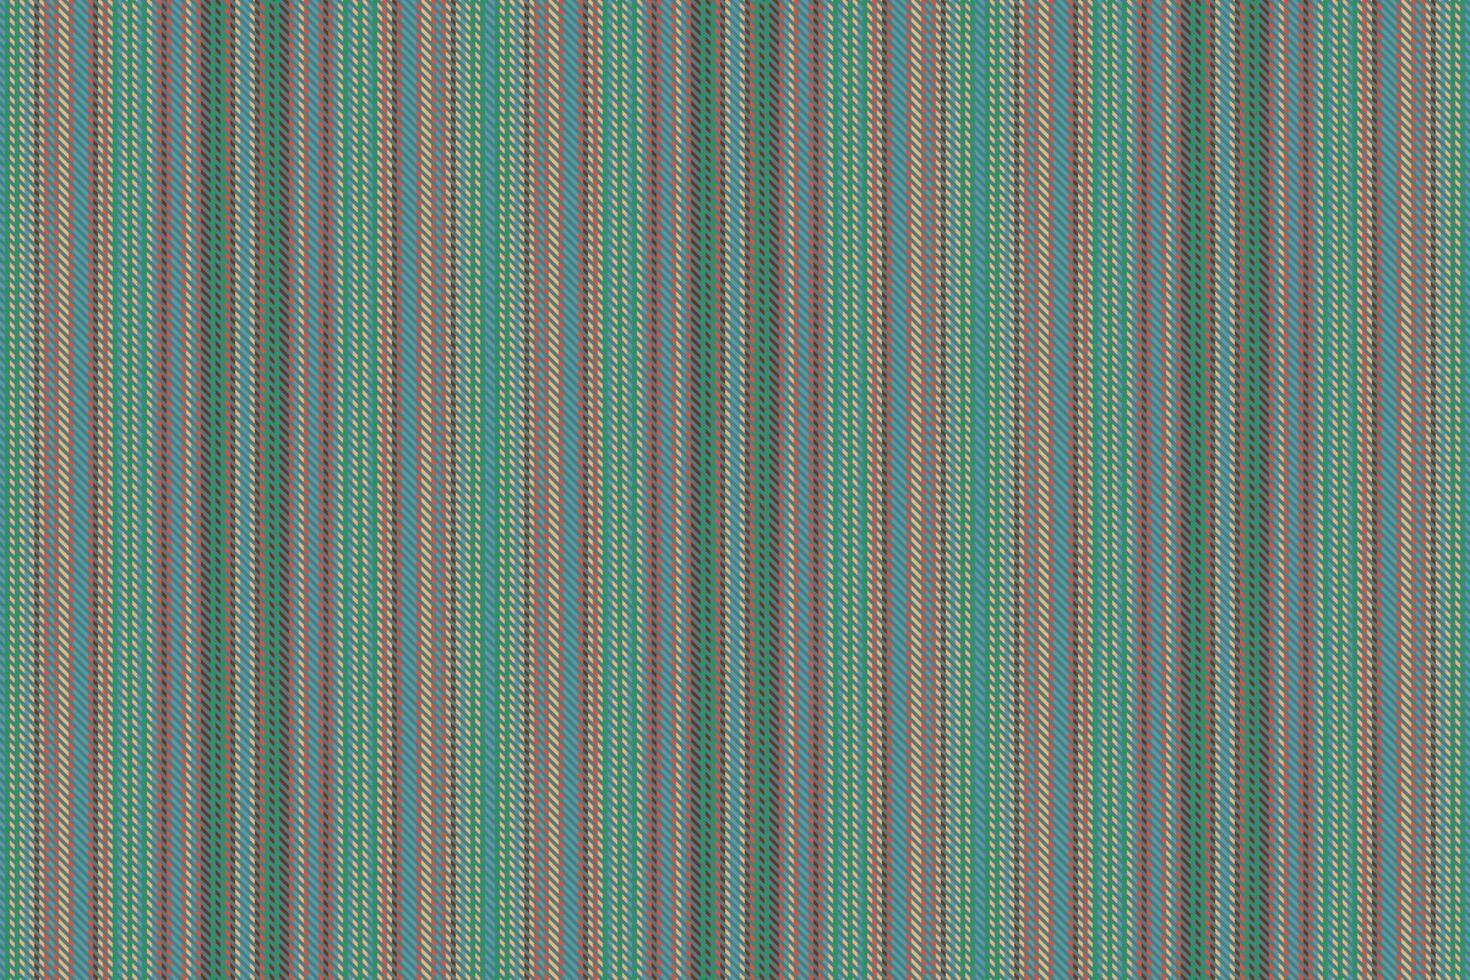 Texture vertical lines. Fabric textile stripe. Vector background seamless pattern.